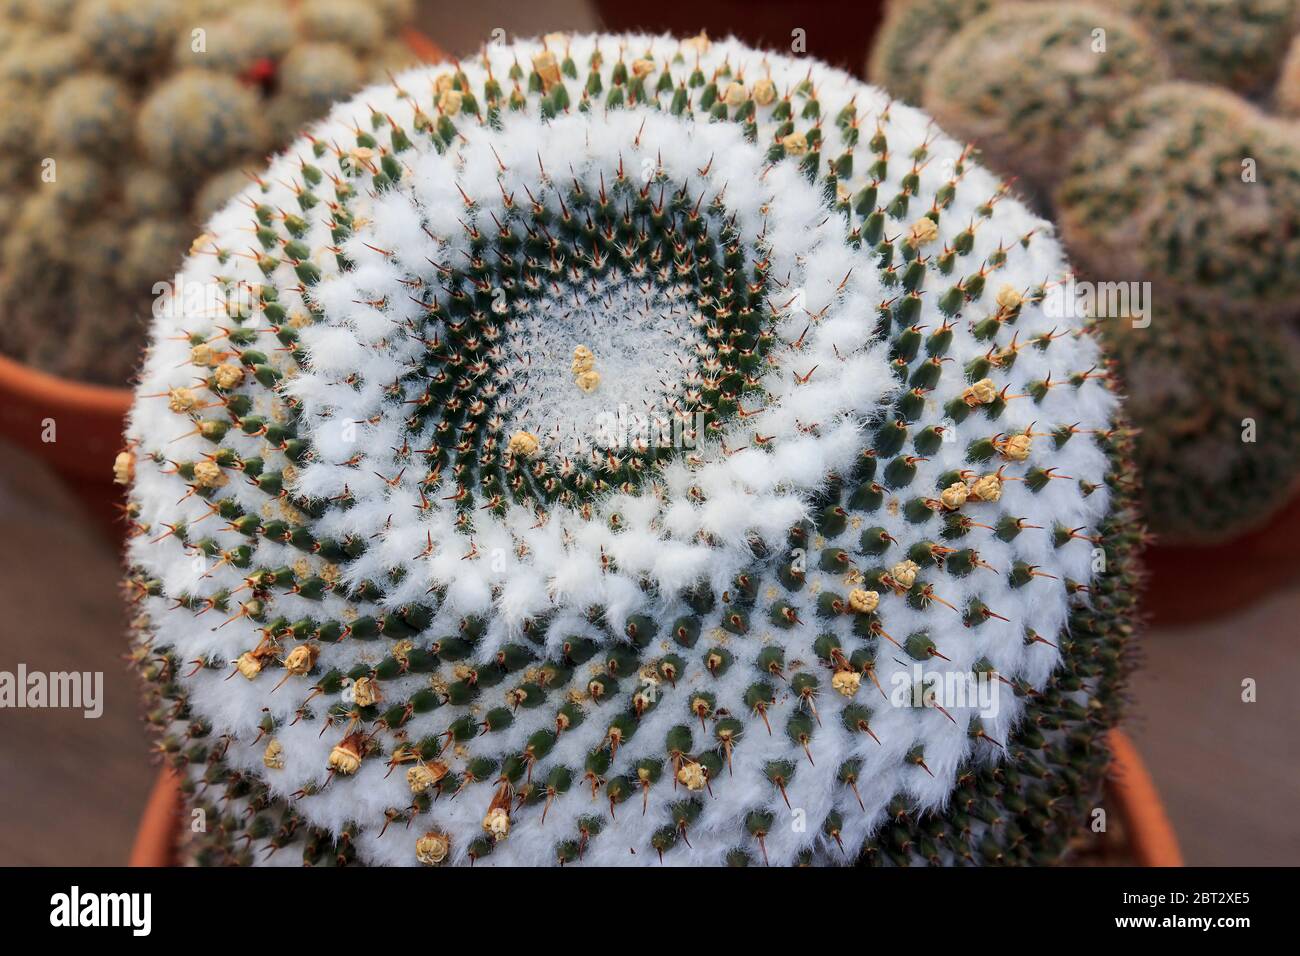 Mammillaria sempervivi, a round artful looking cactus with cottony growths. Stock Photo